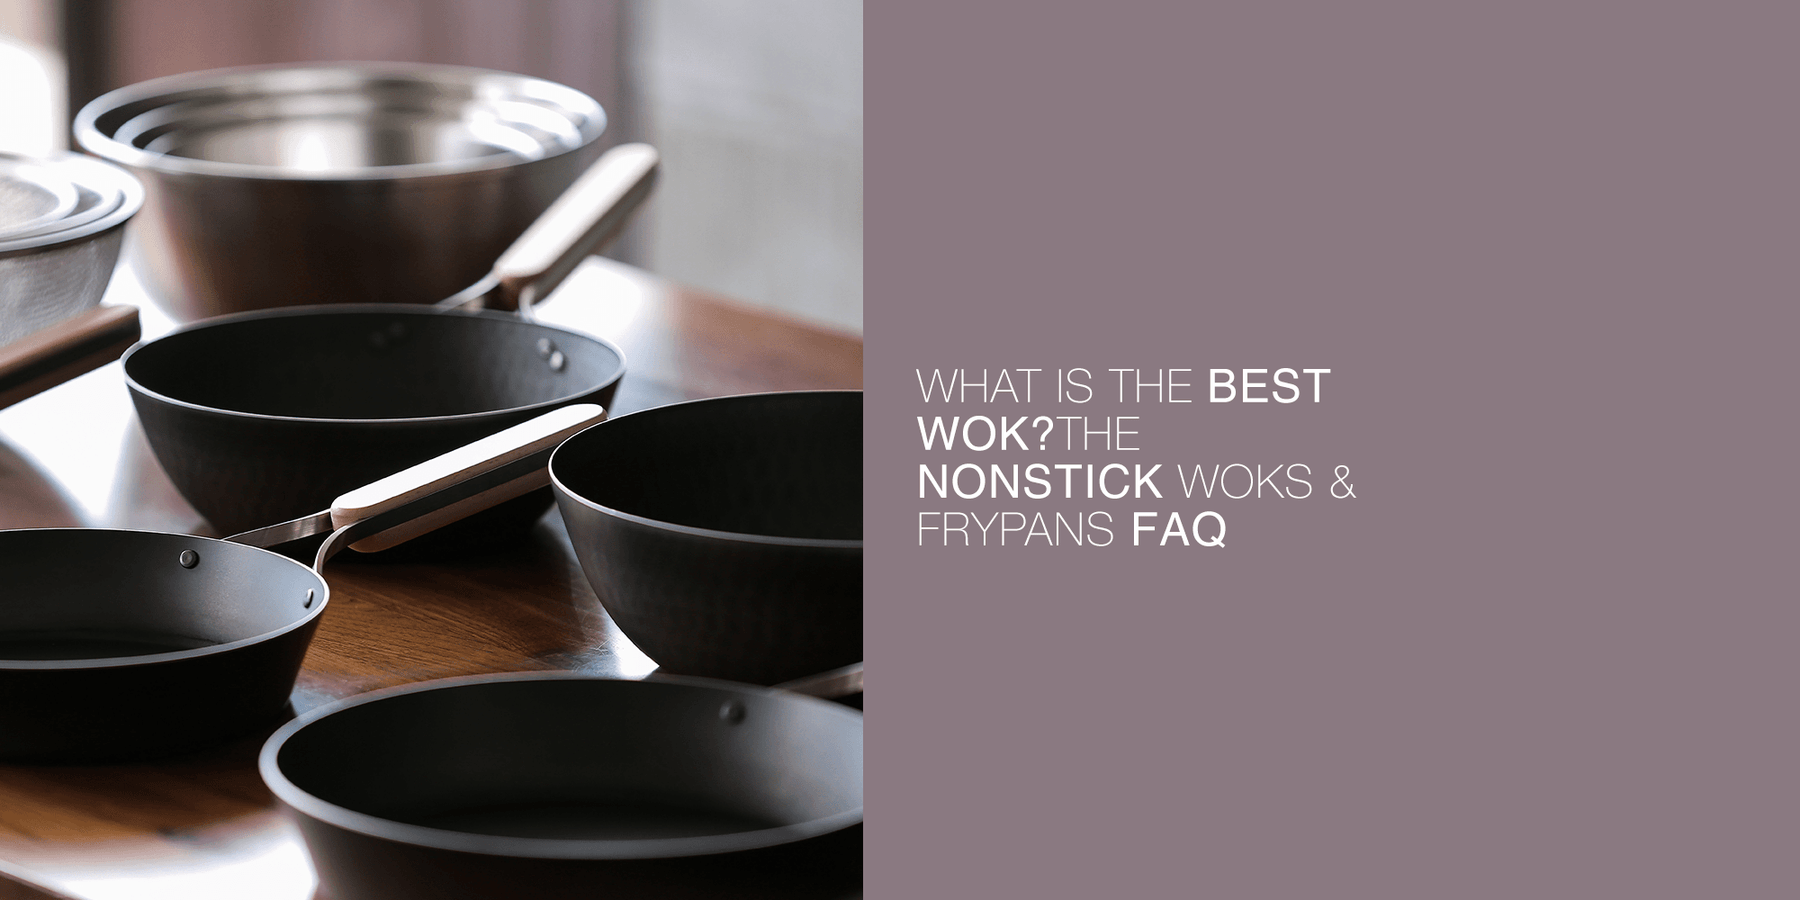 What Is The Best Wok? (2) - Nonstick Woks & Frypans FAQs